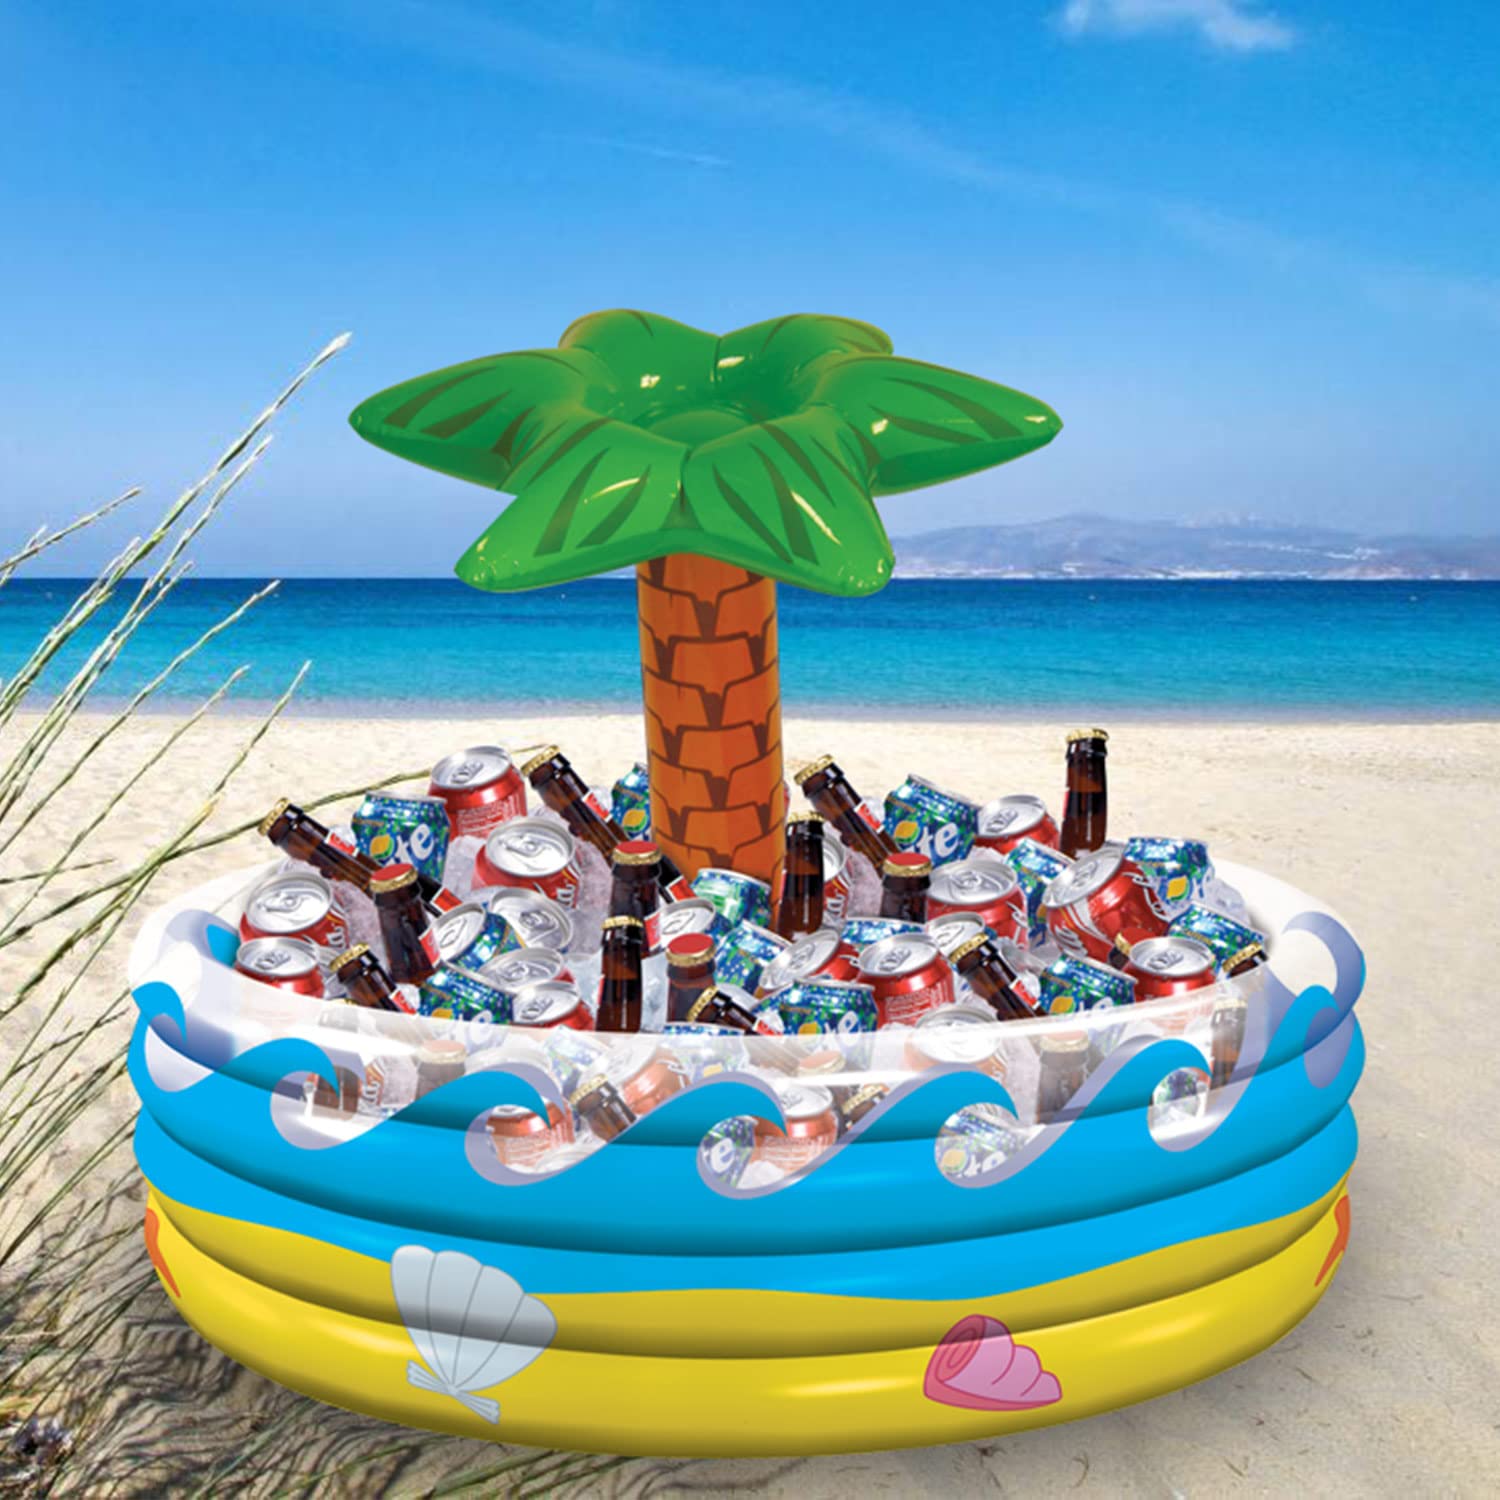 Amscan Tropical Palm Tree Inflatable Cooler, 14' x 29 1/2', Multicolor, 1 Pc